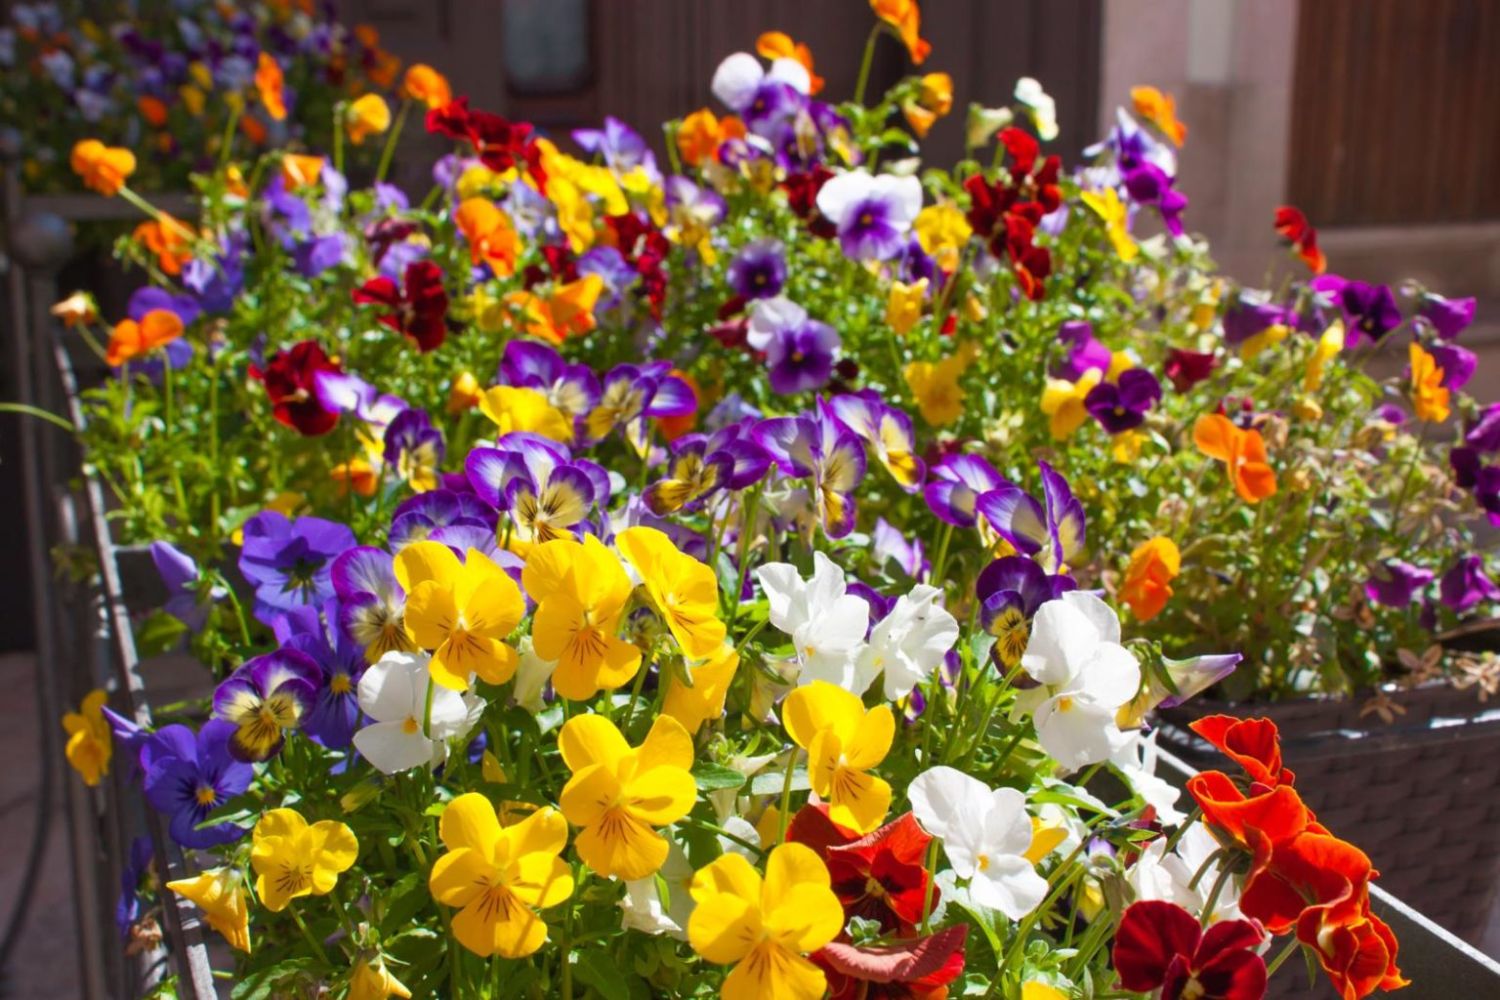 An array of colourful pansies